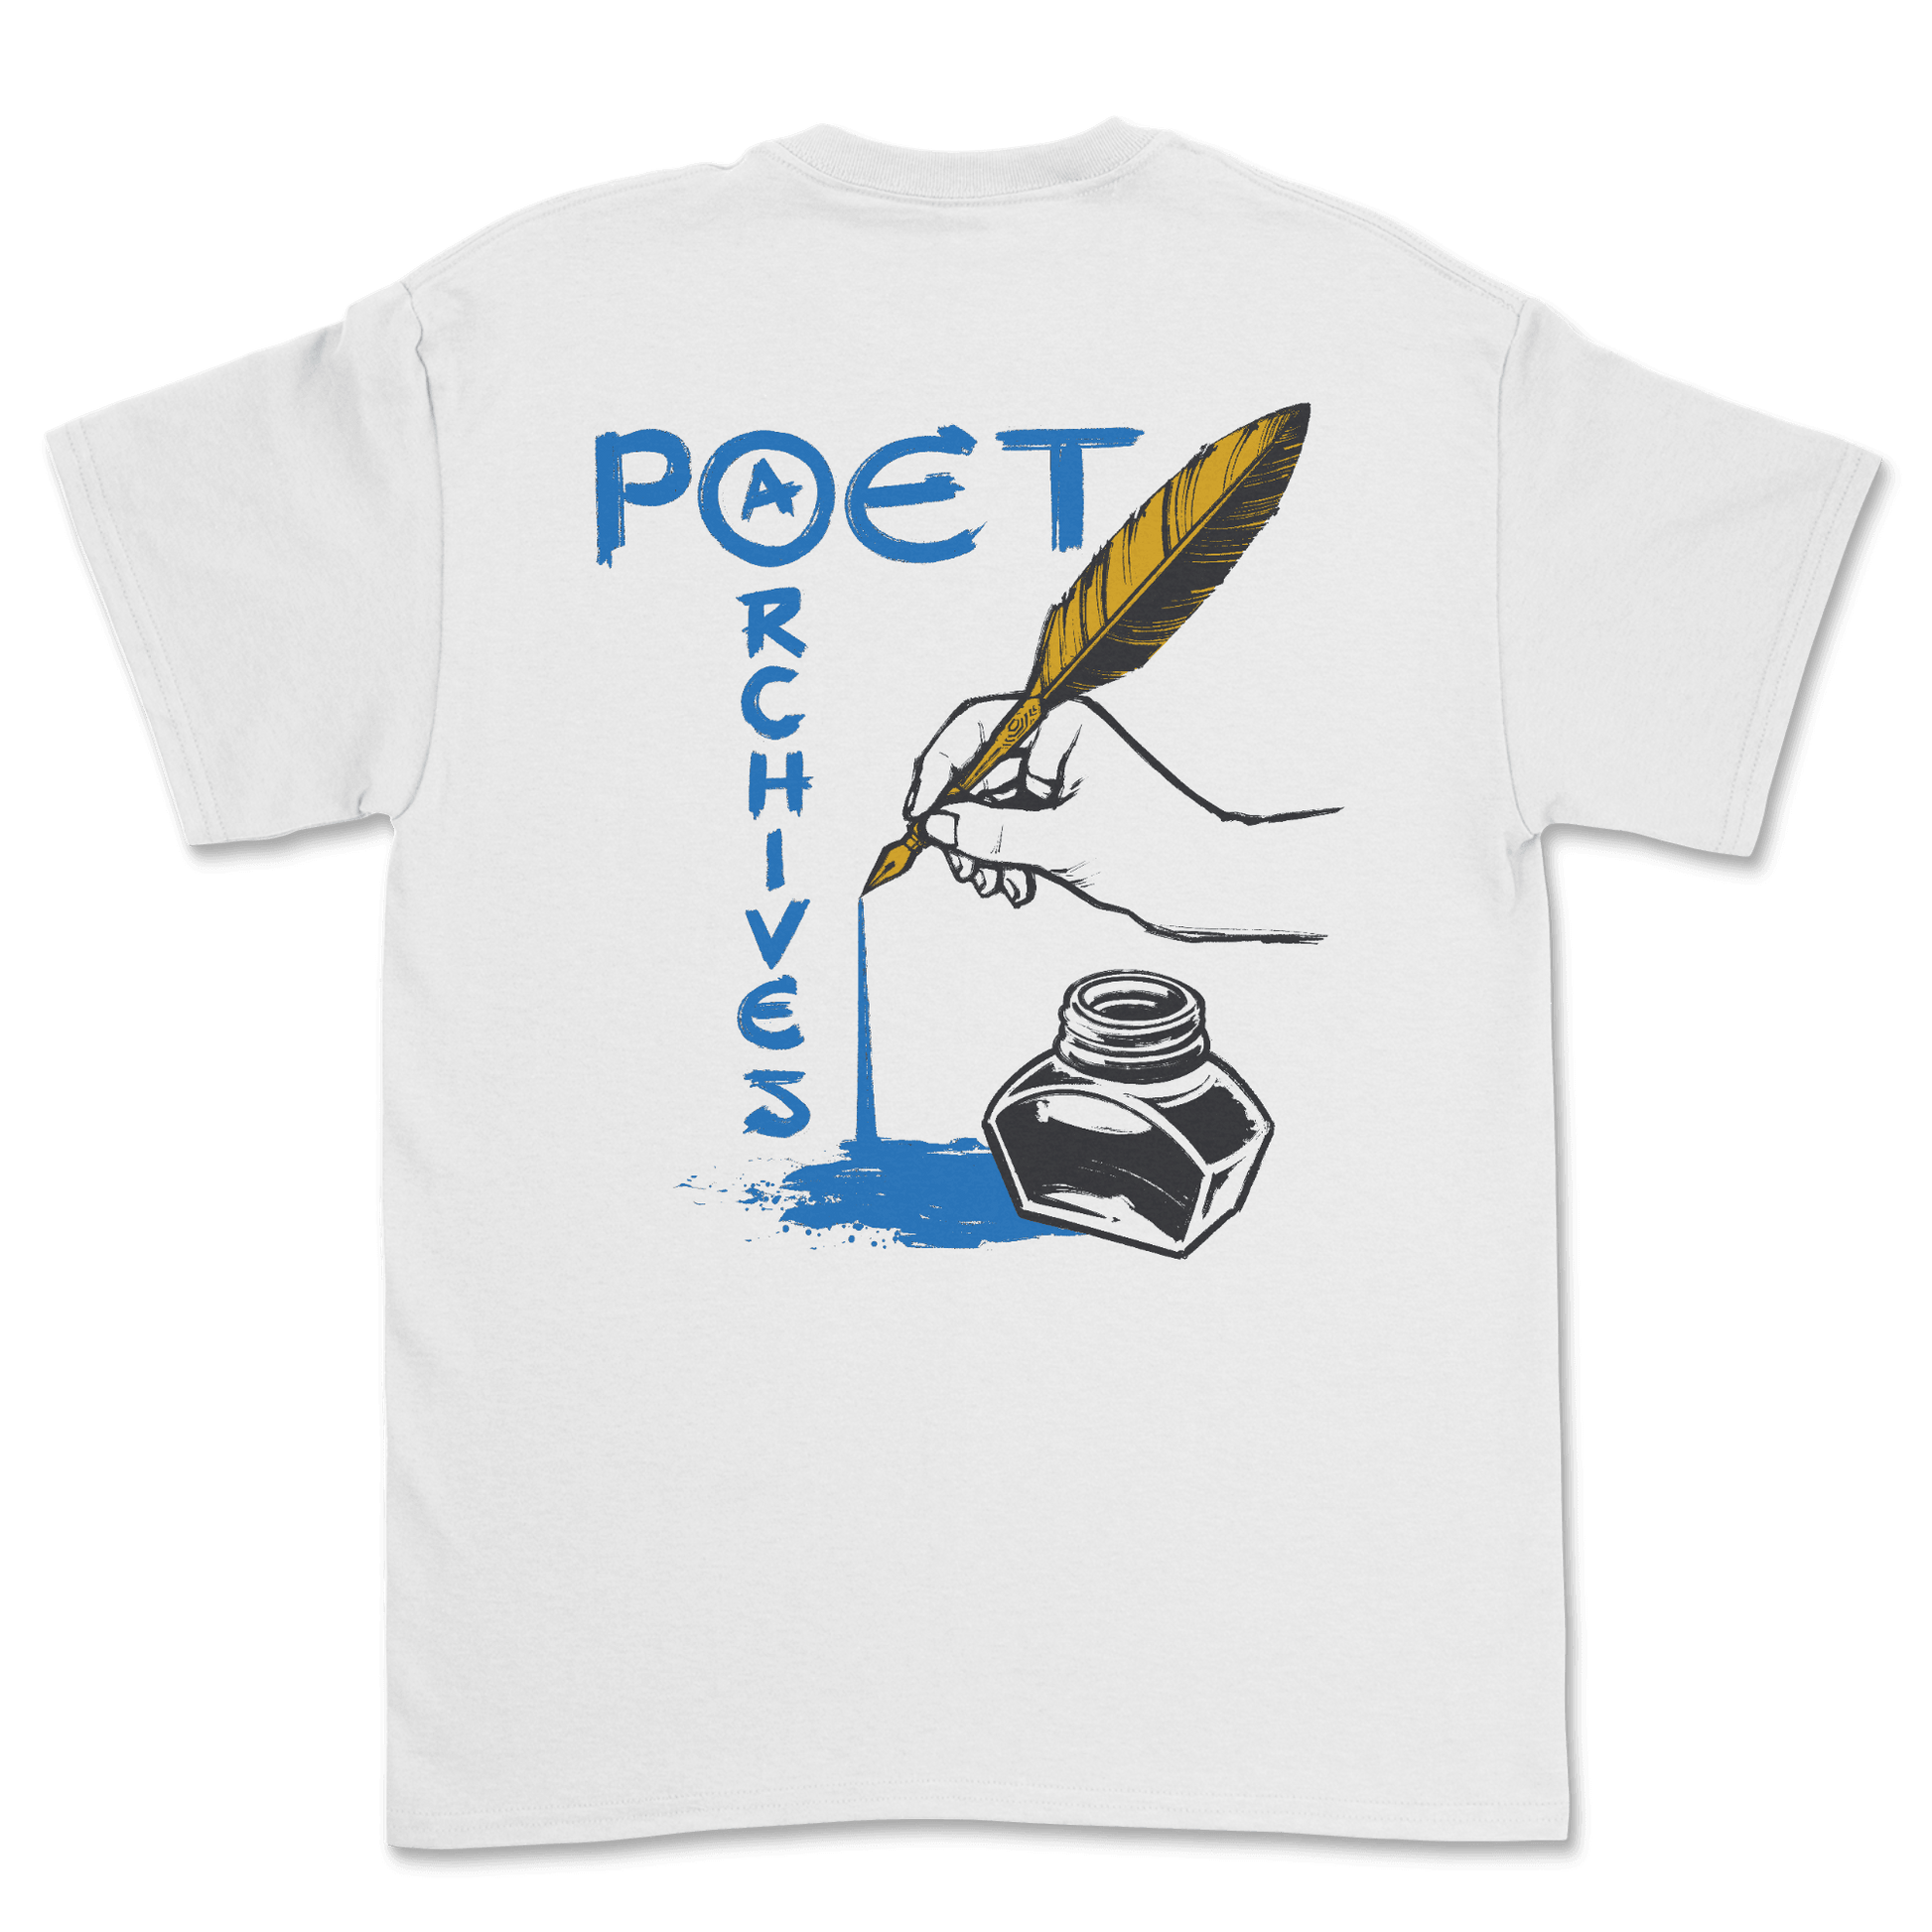 Quill T-Shirt - Poet Archives